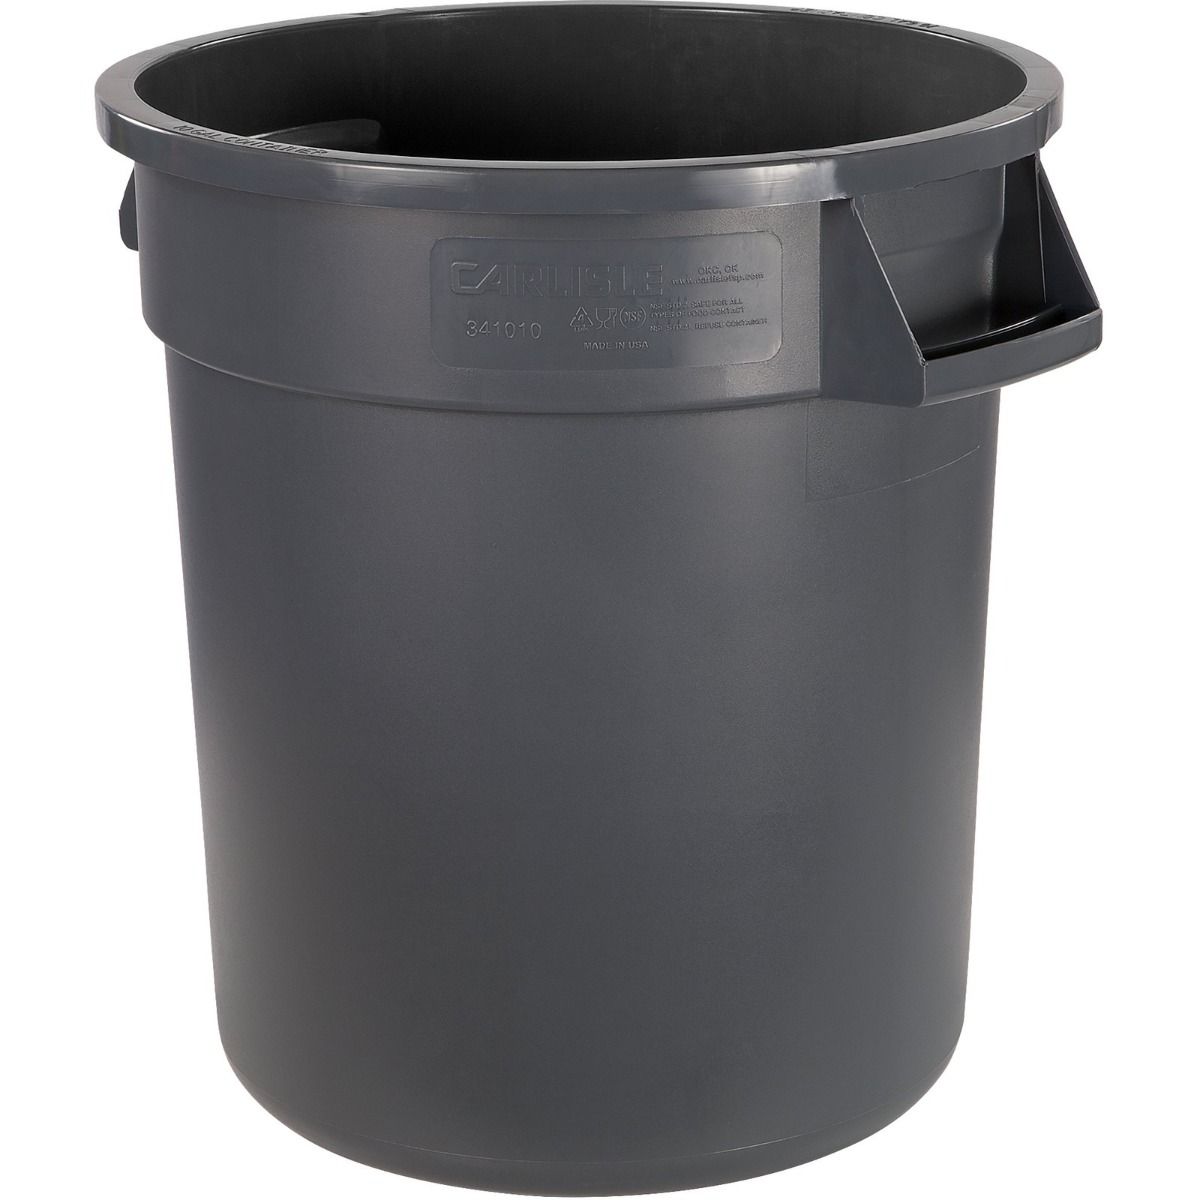 Carlisle 3410 Lid for Bronco Round Waste Container Gray 